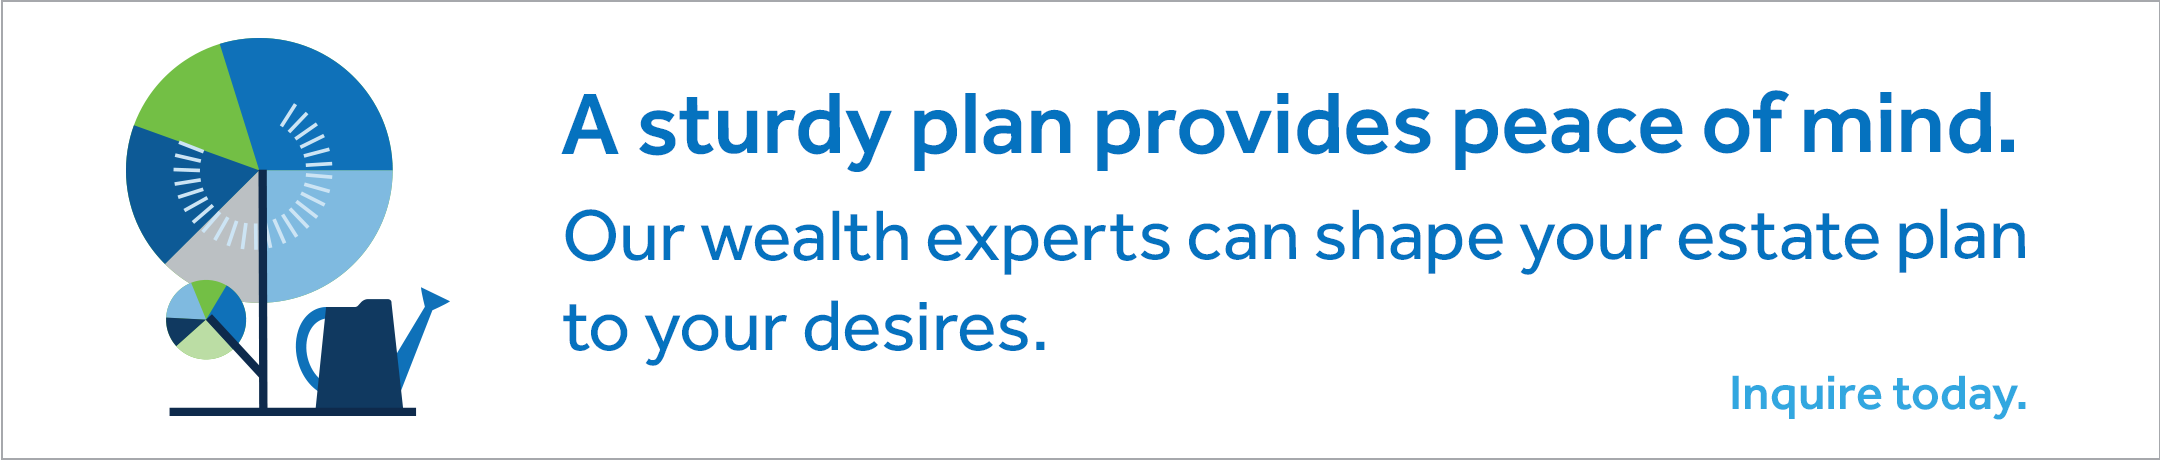 An ad that says "A sturdy plan provides peace of mind. Our wealth experts can shape your estate plan to your desires. Inquire today." to the left of the text is an illustration of a watering can and a tree.